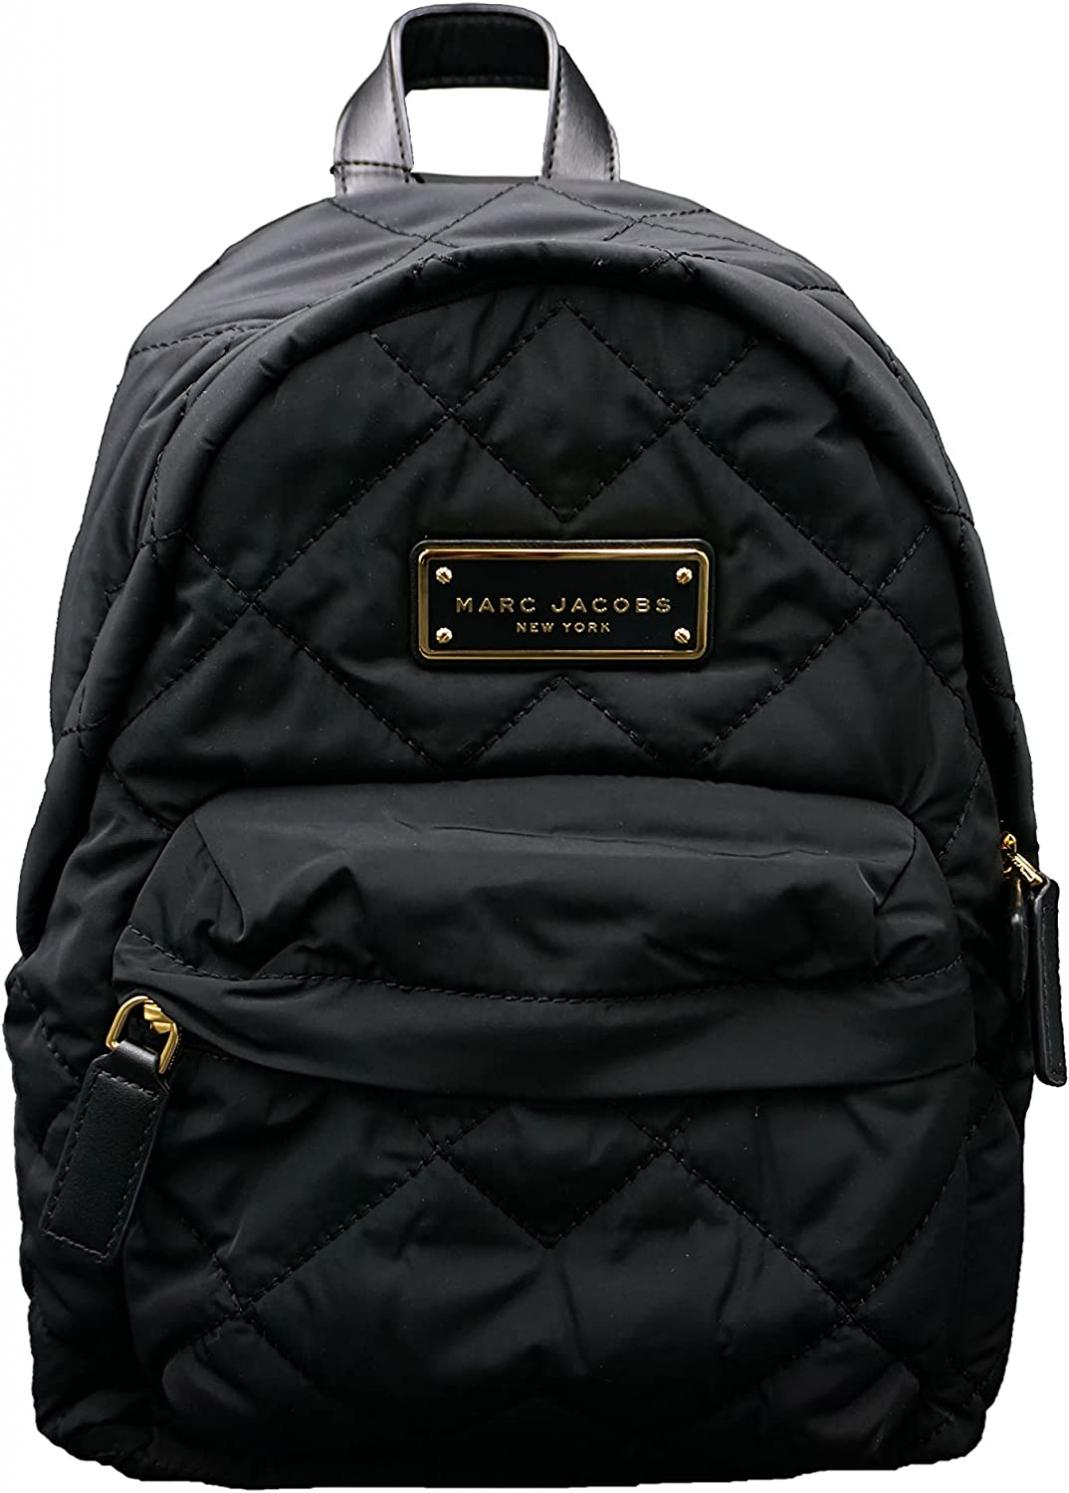 Marc Jacobs M0016679 Black/Gold Hardware Women's Quilted Nylon Mini Backpack